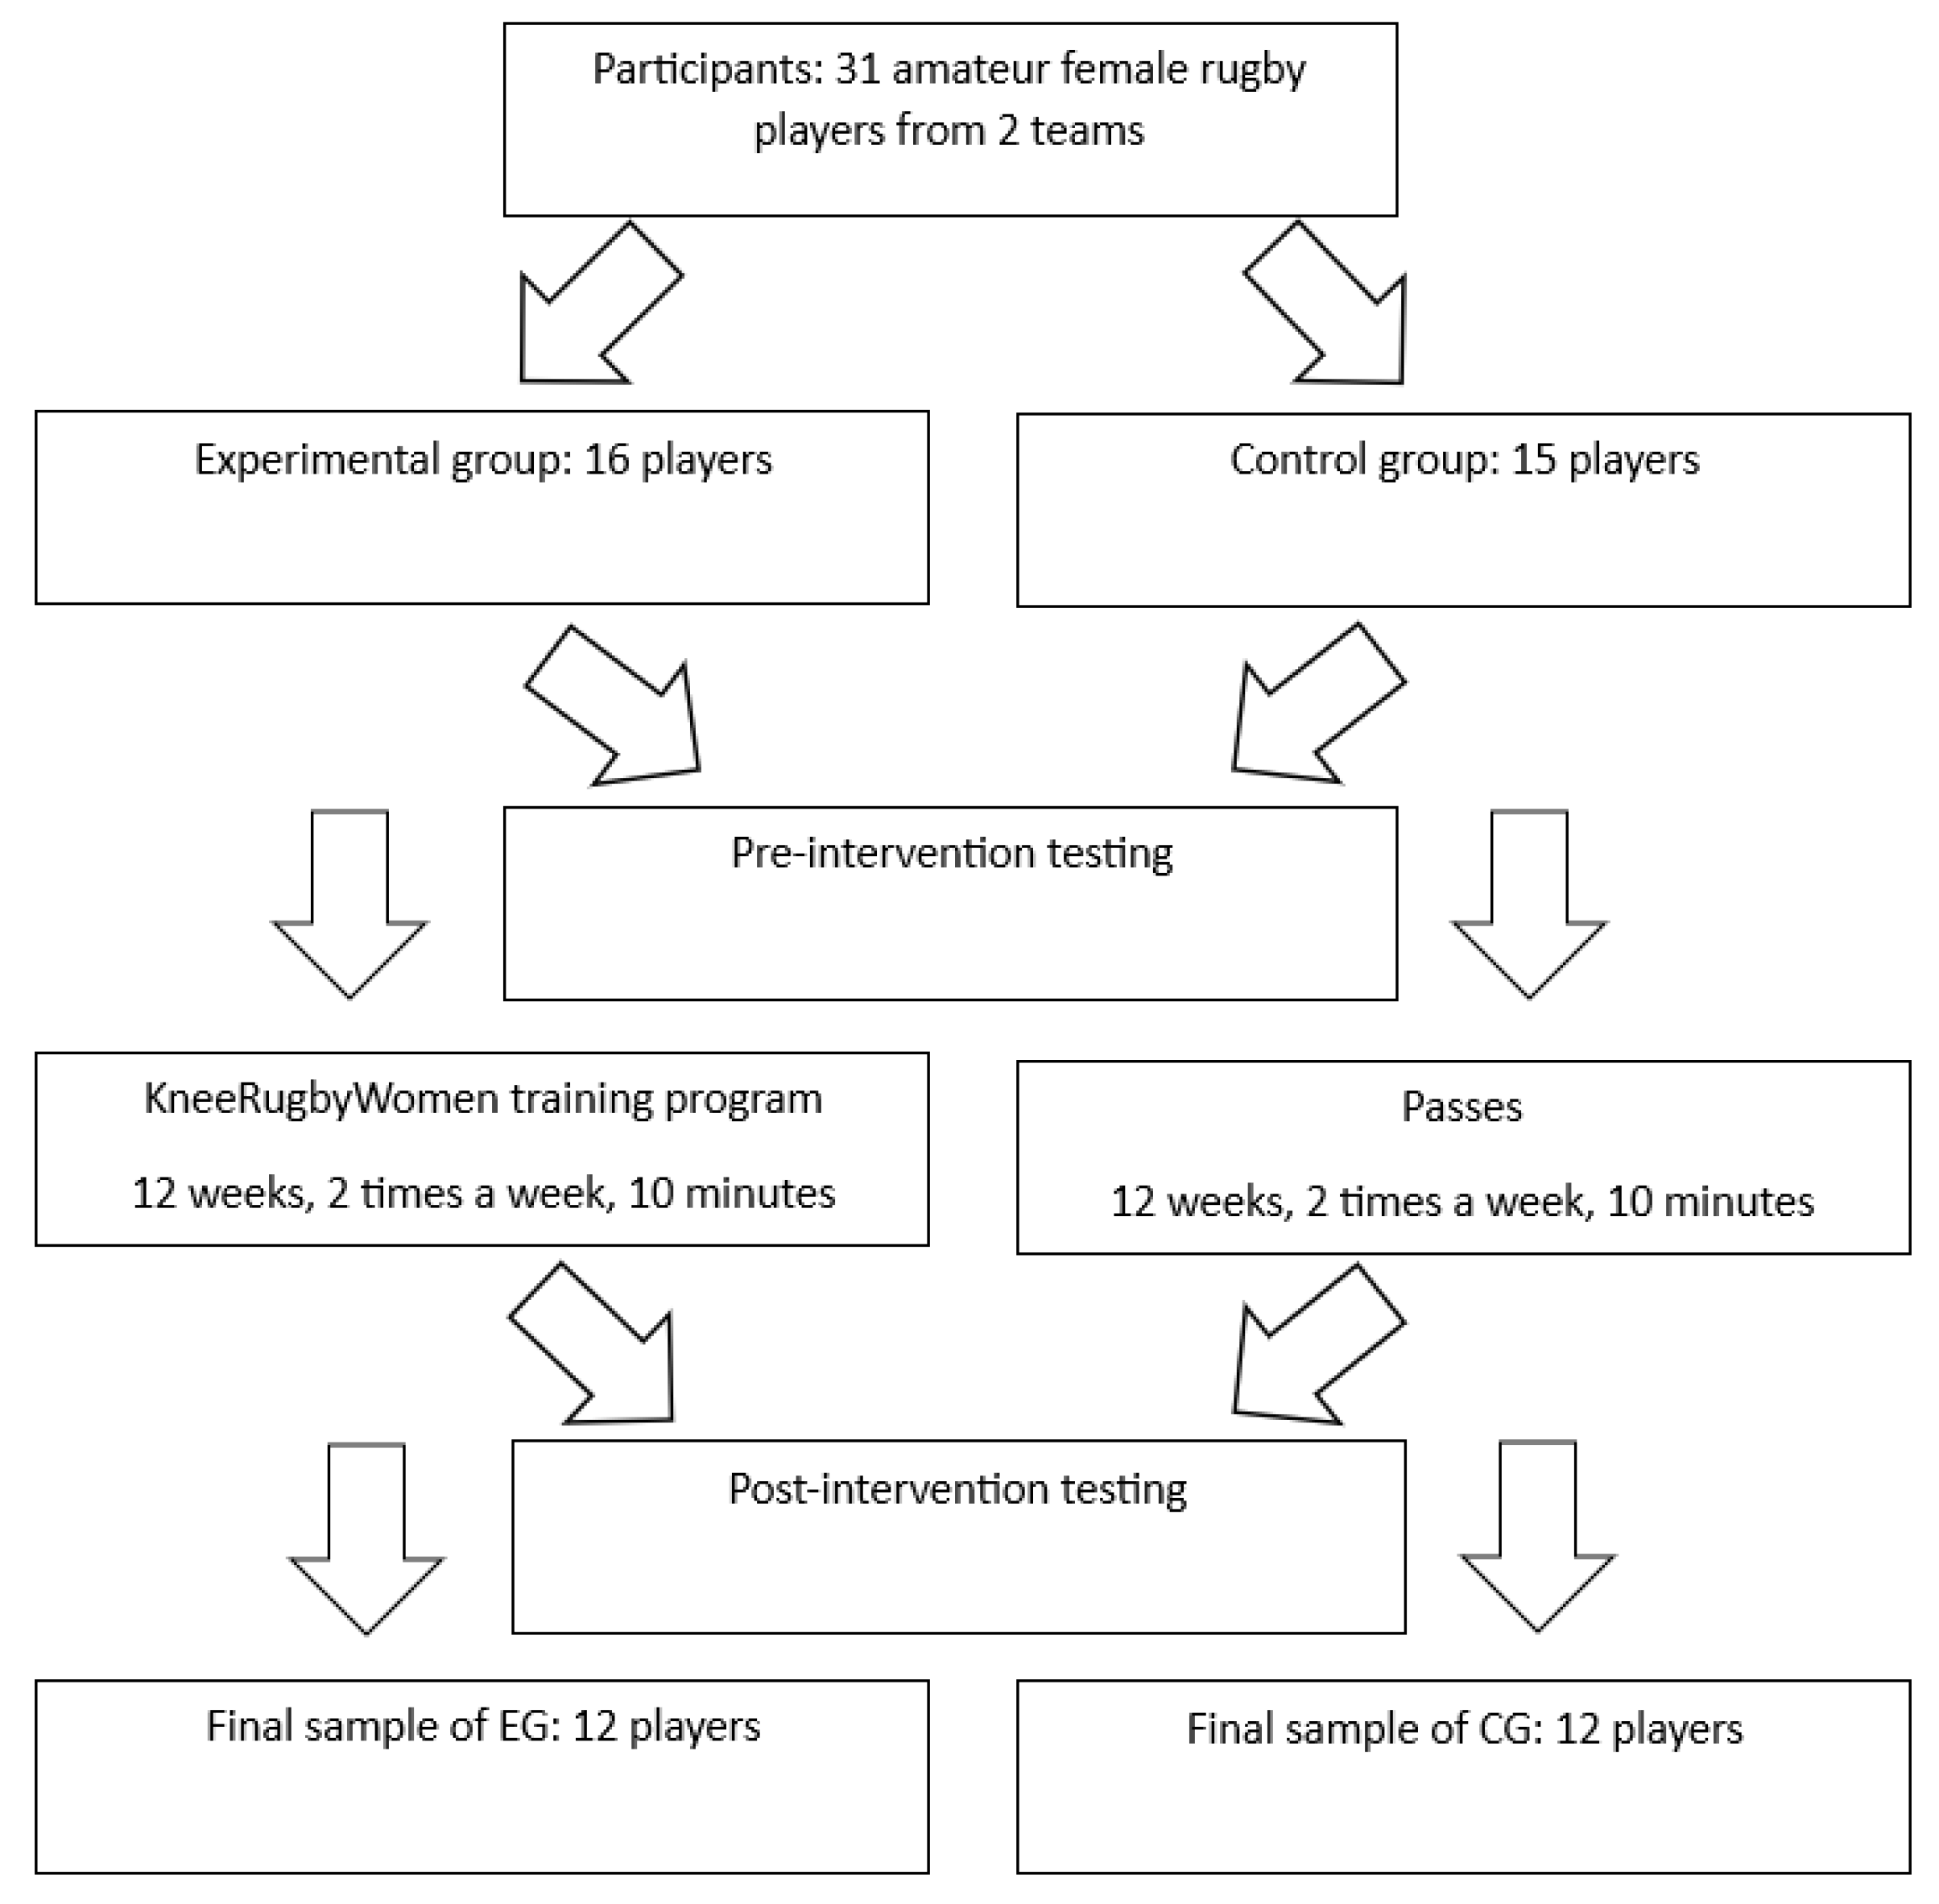 Applied Sciences | Free Full-Text | The Impact of a Novel Neuromuscular  Training Program on Leg Stiffness, Reactive Strength, and Landing  Biomechanics in Amateur Female Rugby Players